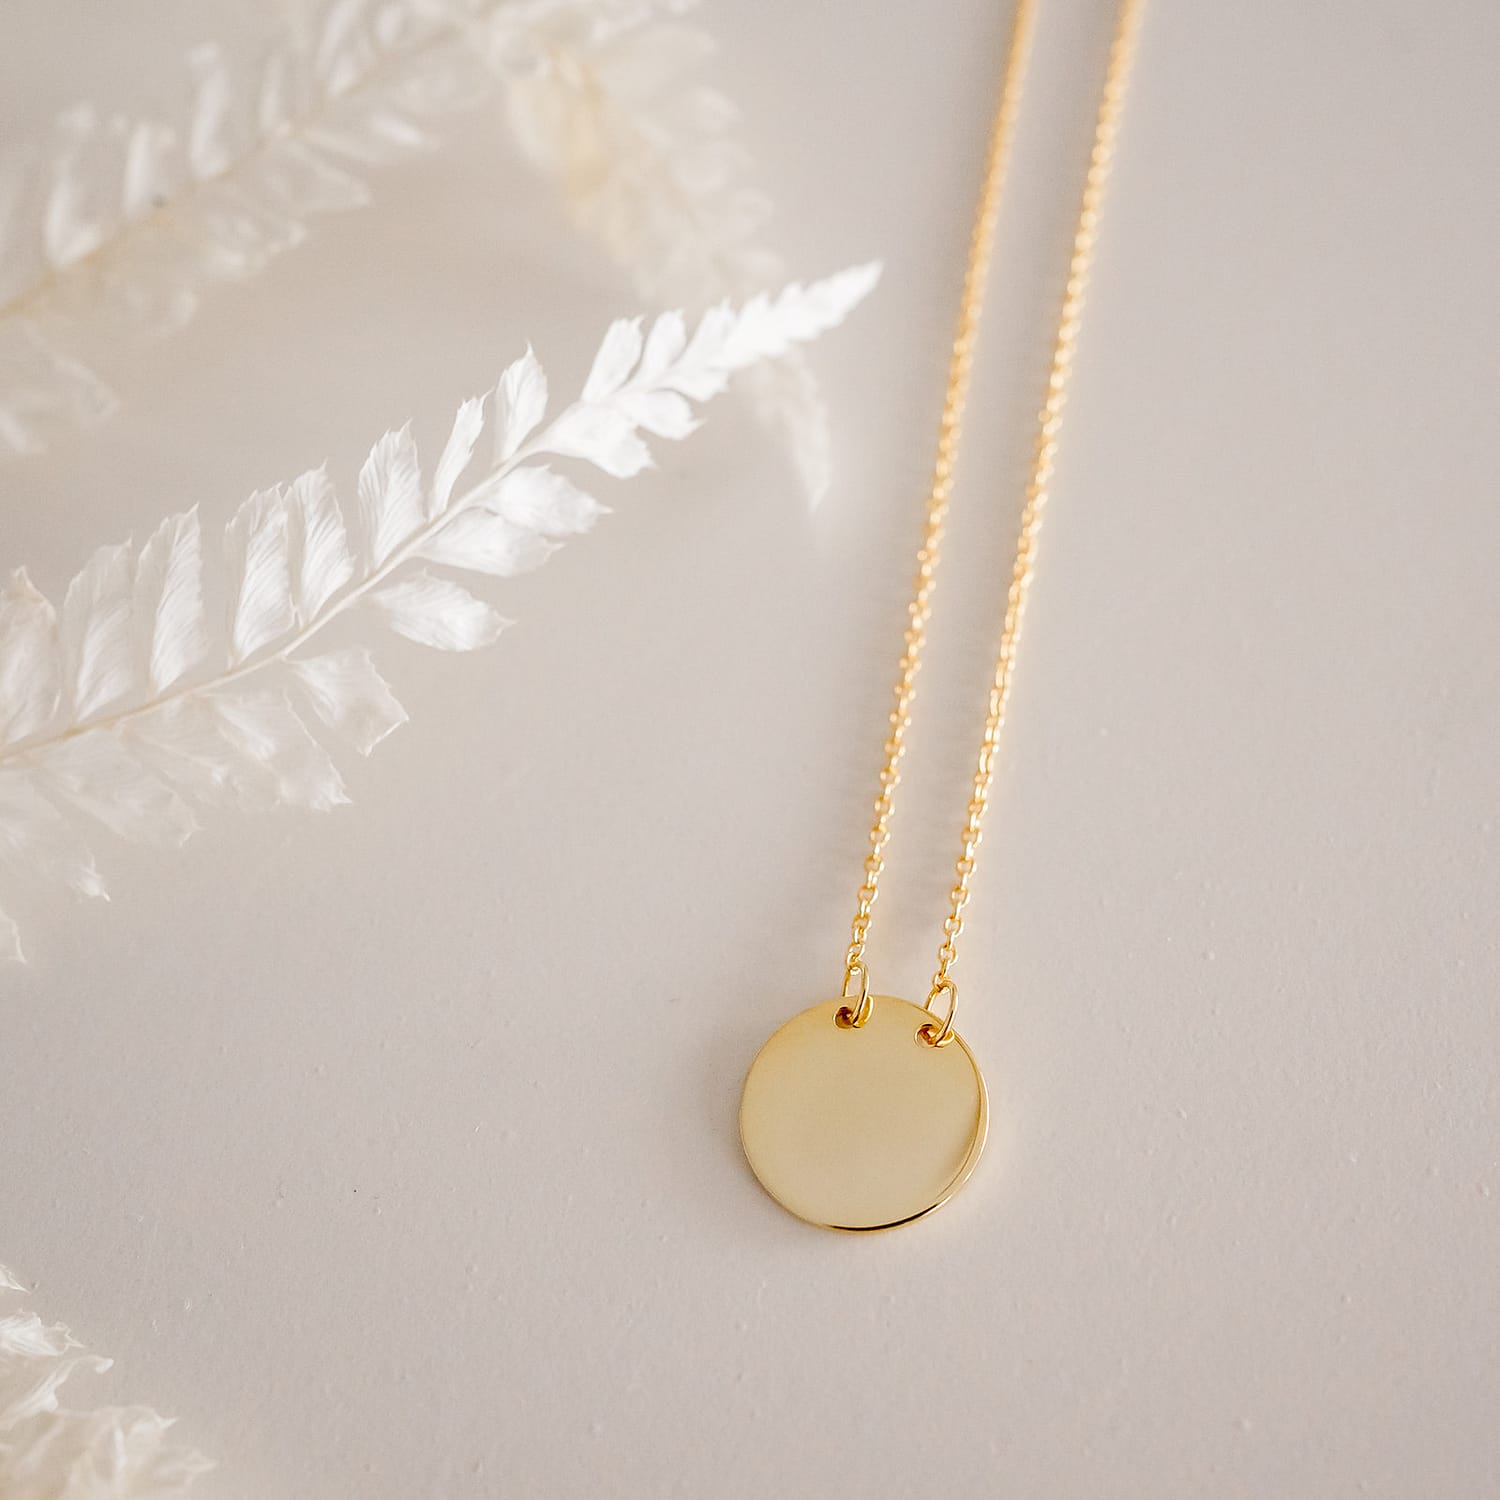 engraved necklace - yellow gold suspended disc necklace